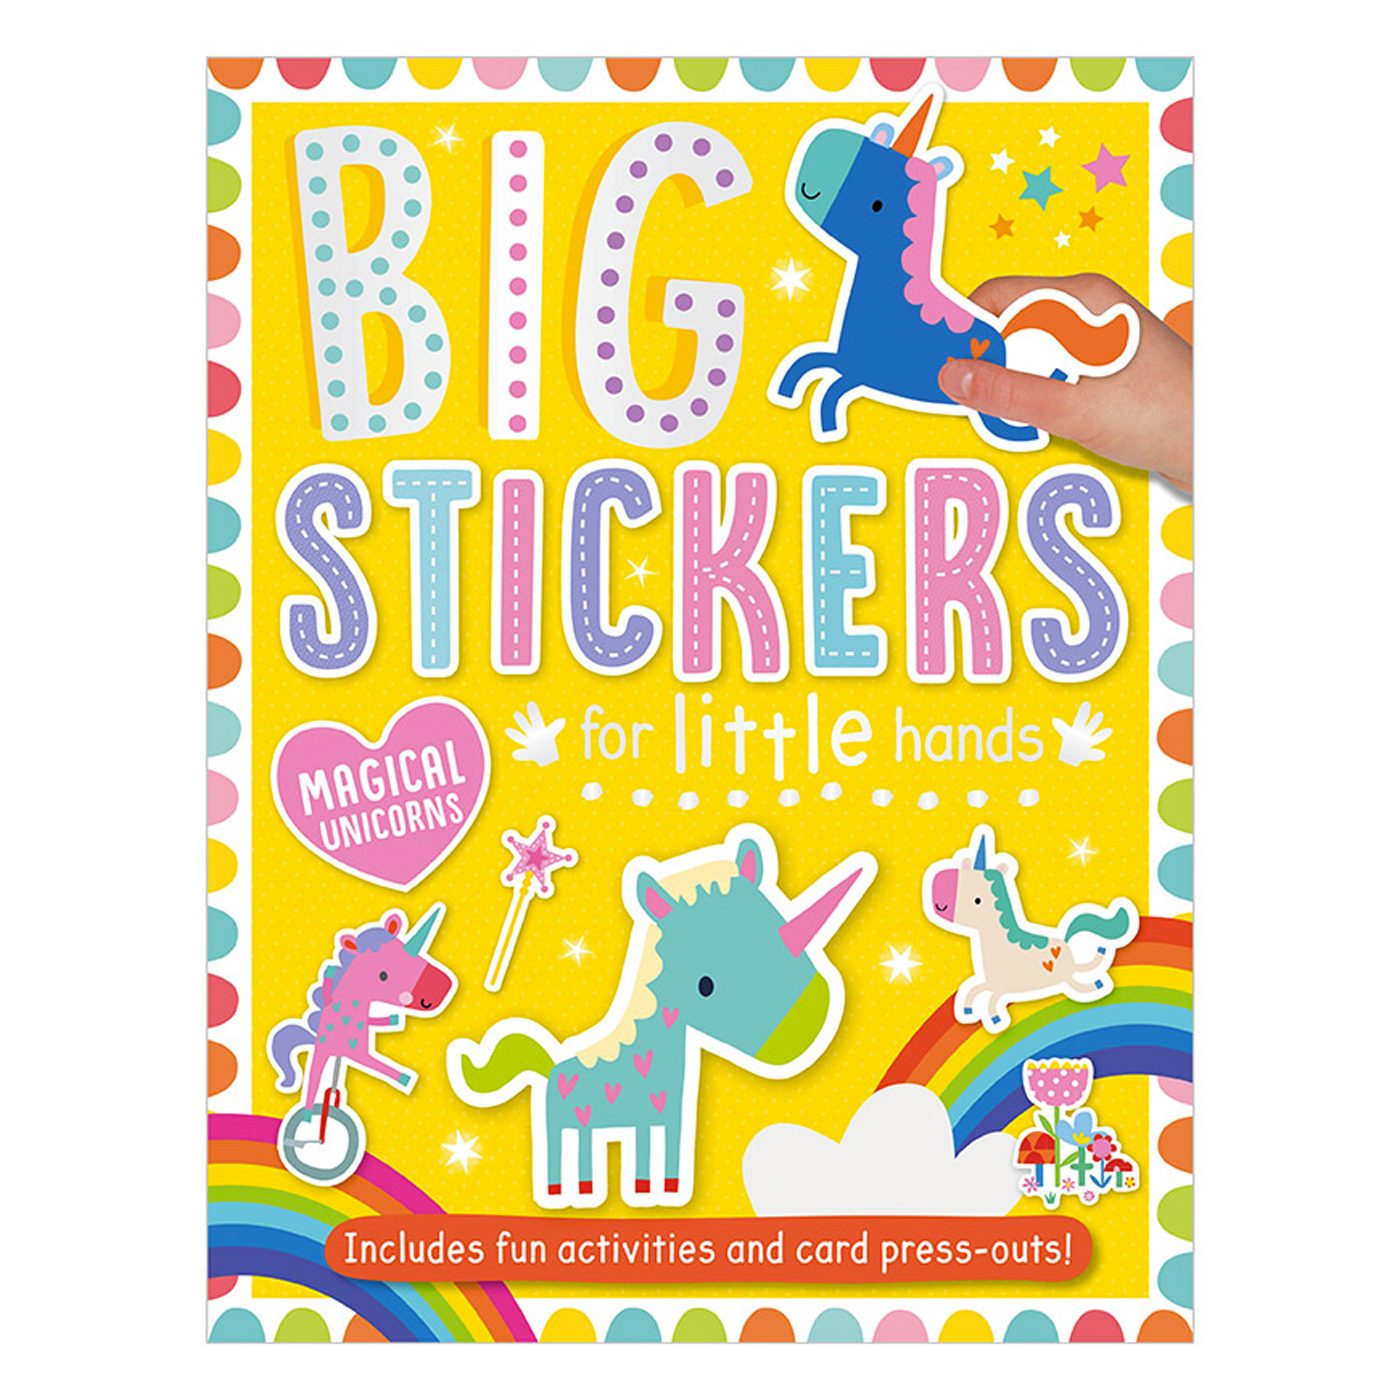  Big Stickers for Little Hands Magical Unicorns